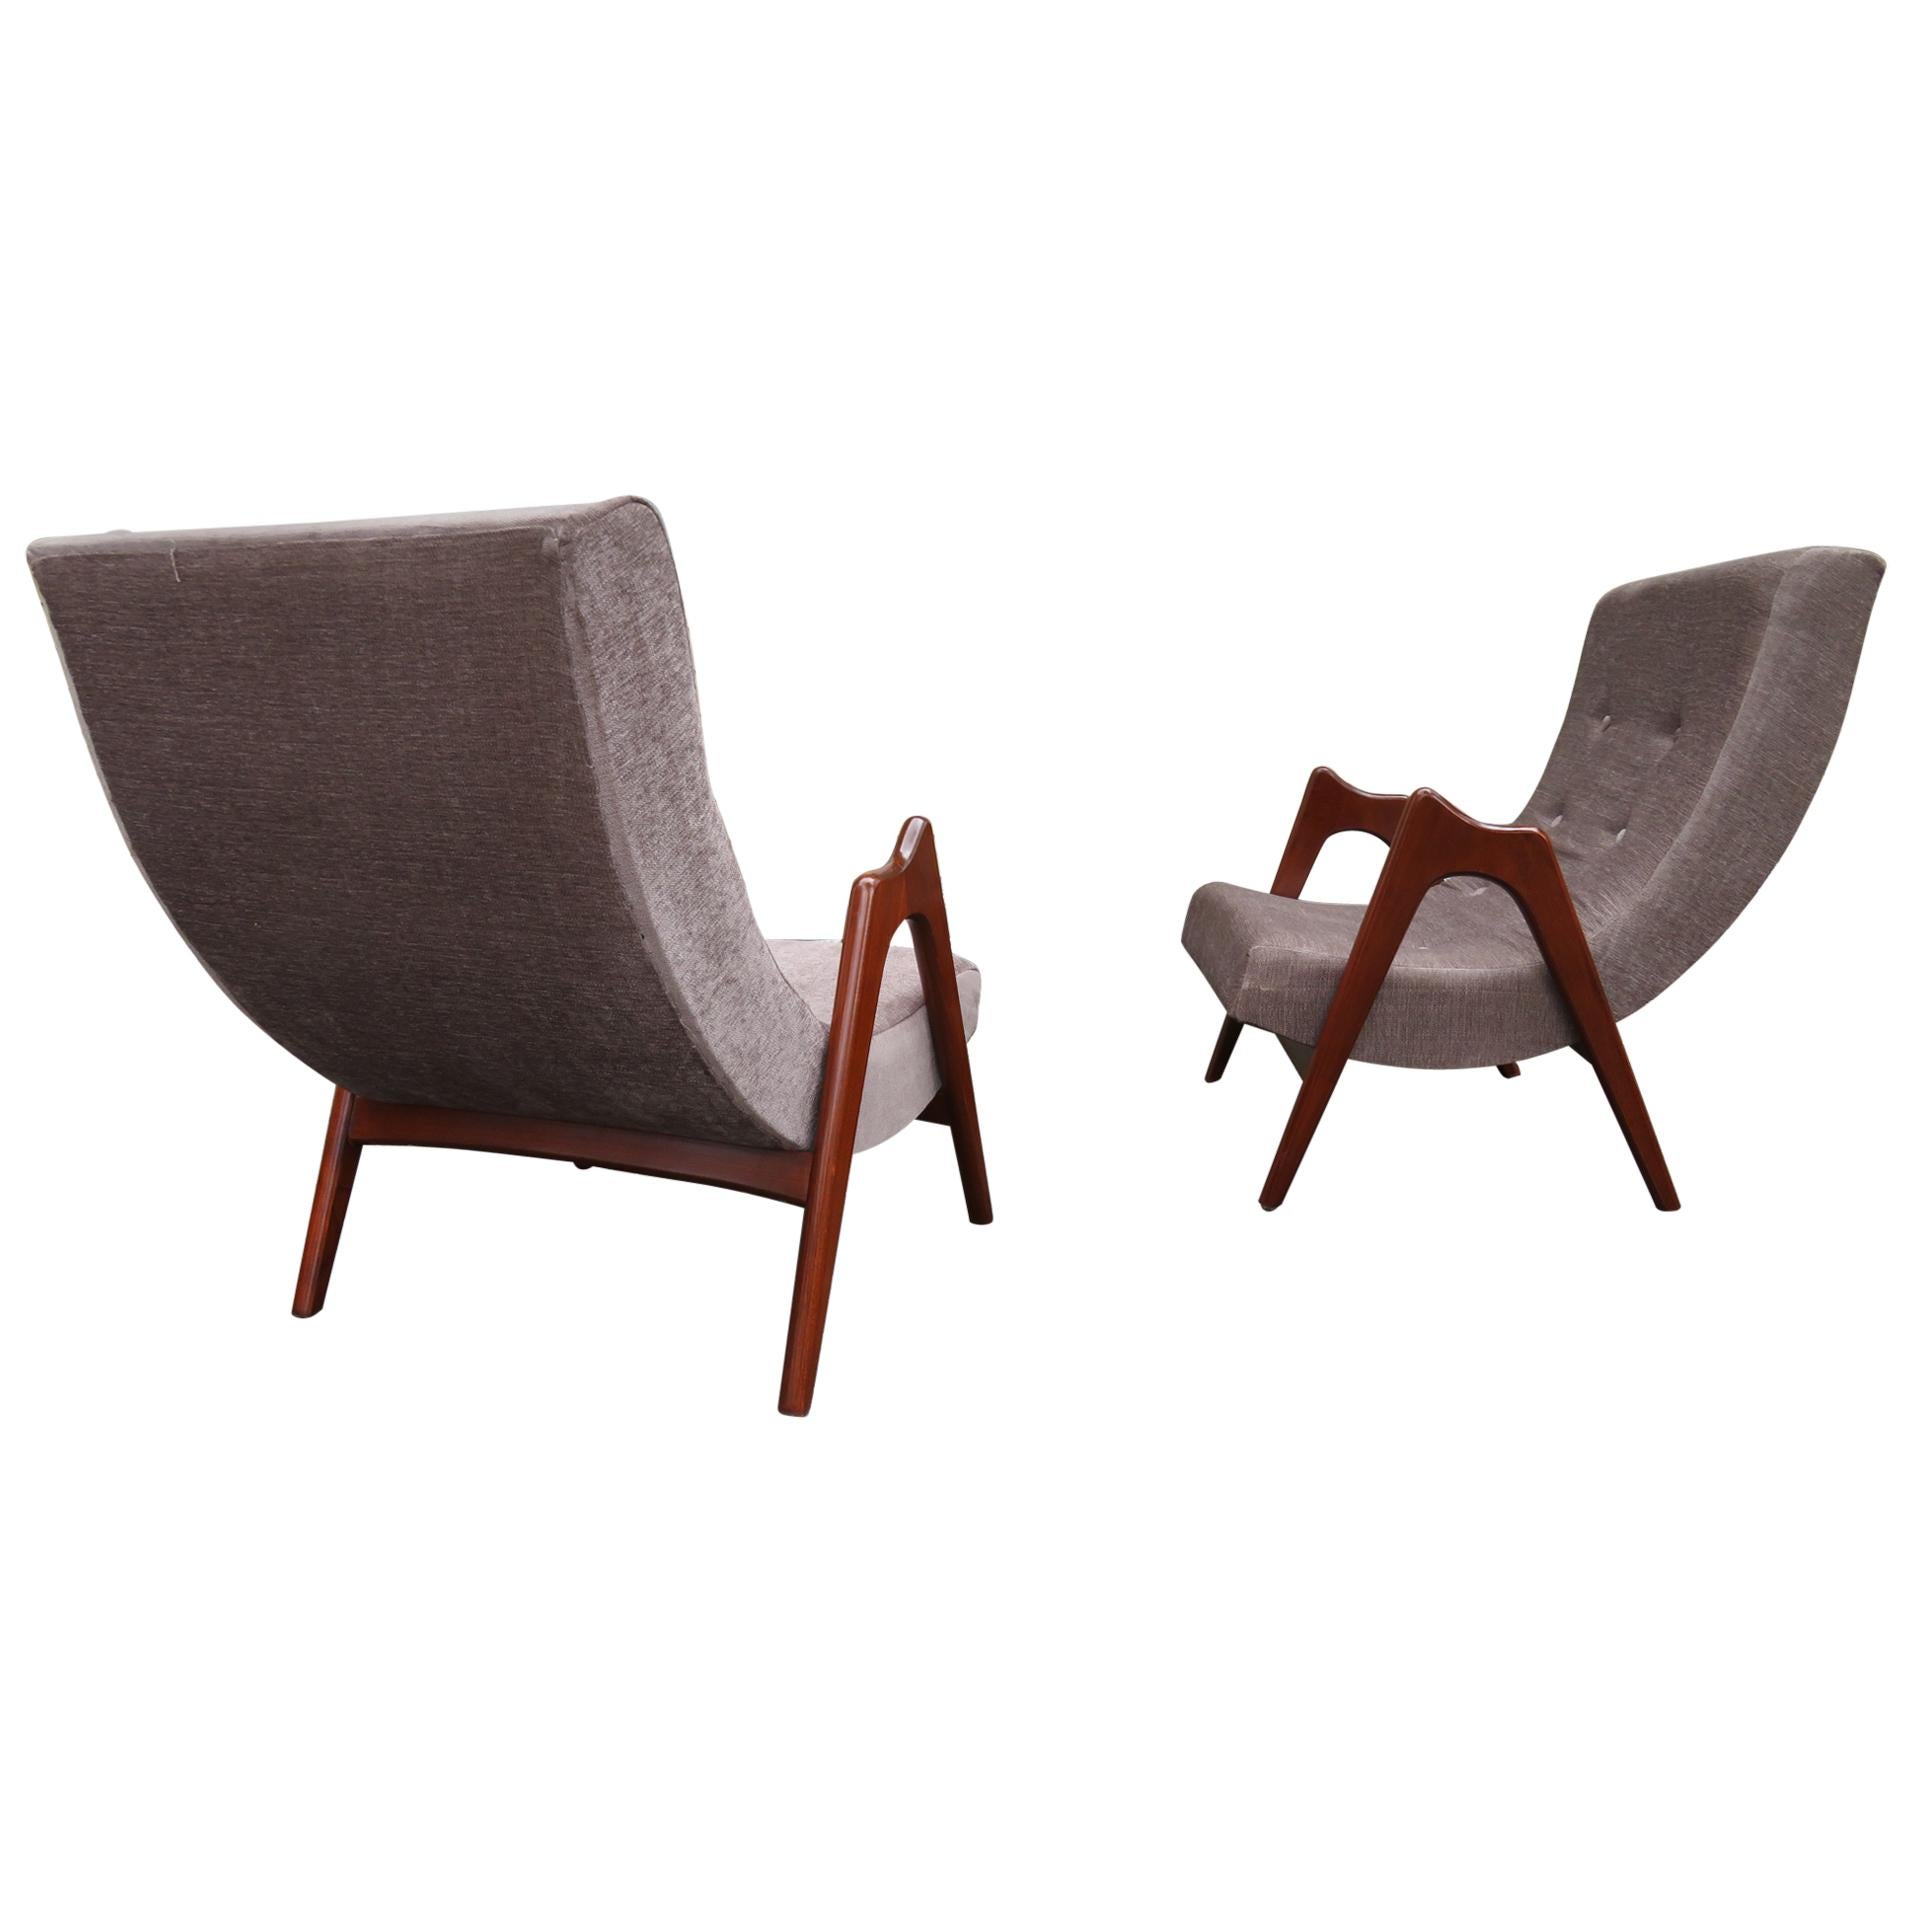 Lovely Pair of Adrian Pearsall Sculptural Walnut Scoop Chairs